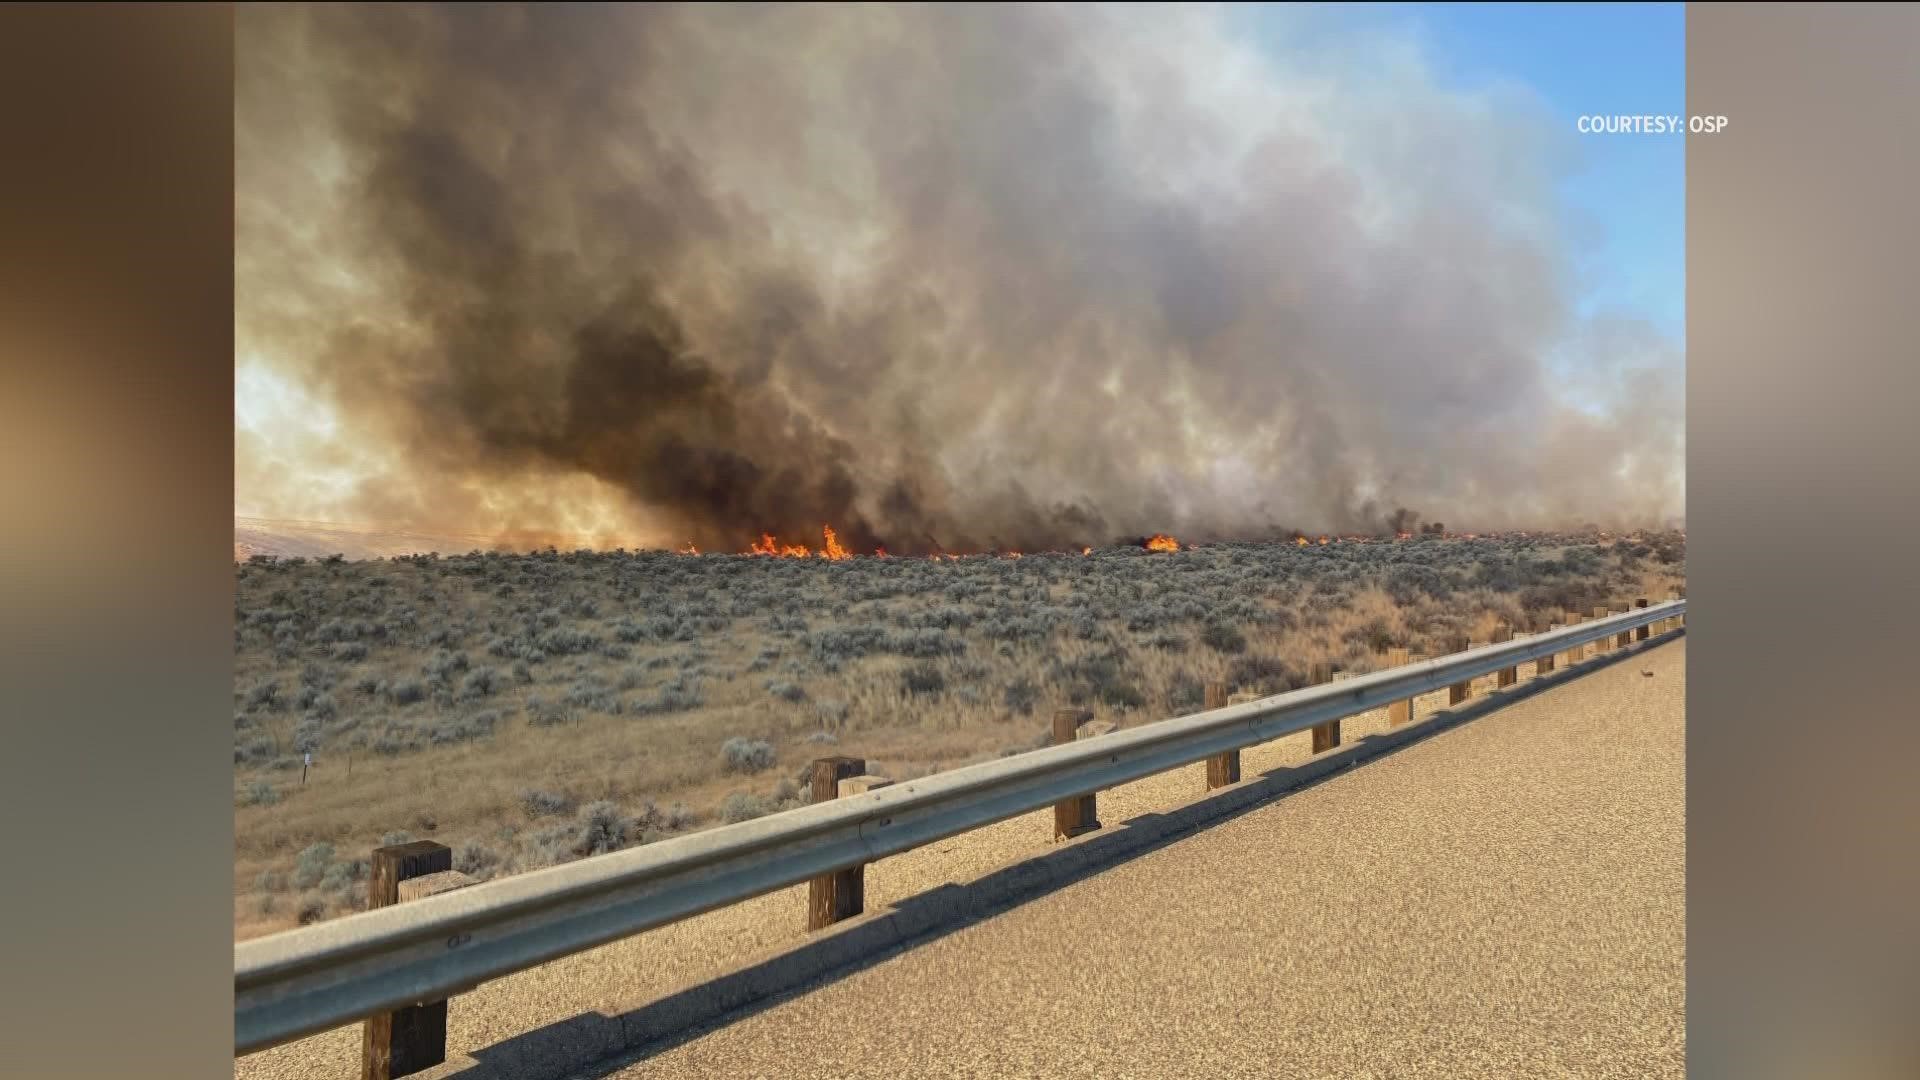 I-84 was temporarily closed from Pendleton and Ontario due to the 365 wildfire, but ODOT asks the public to drive with caution as crews continue to fight the fire.